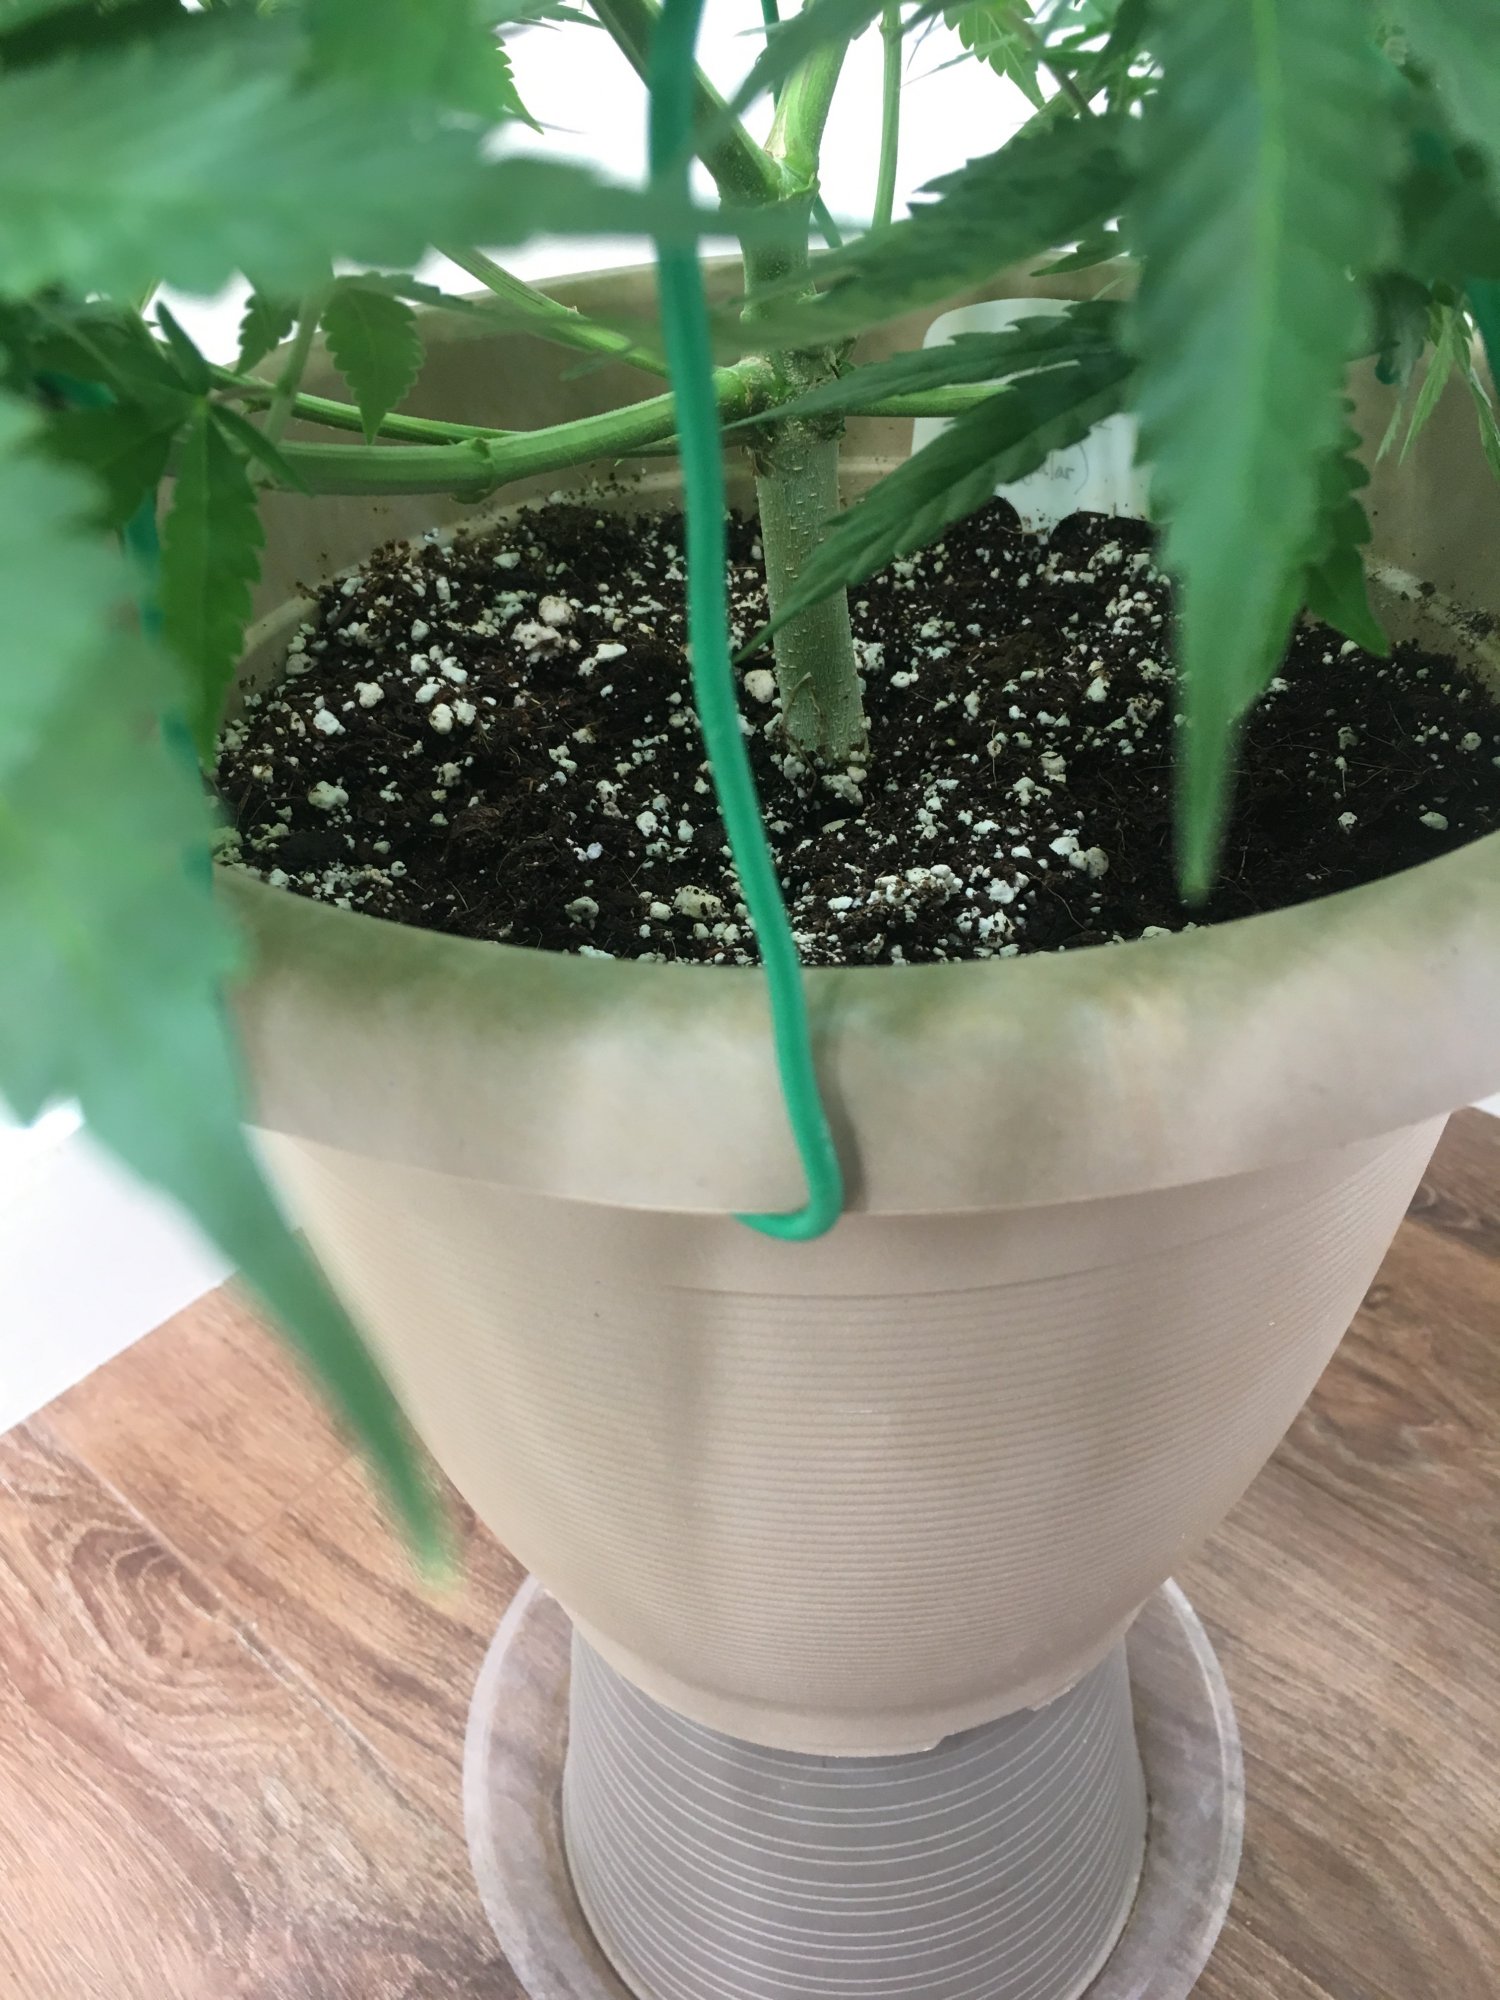 Need help with transplanting a plant 4